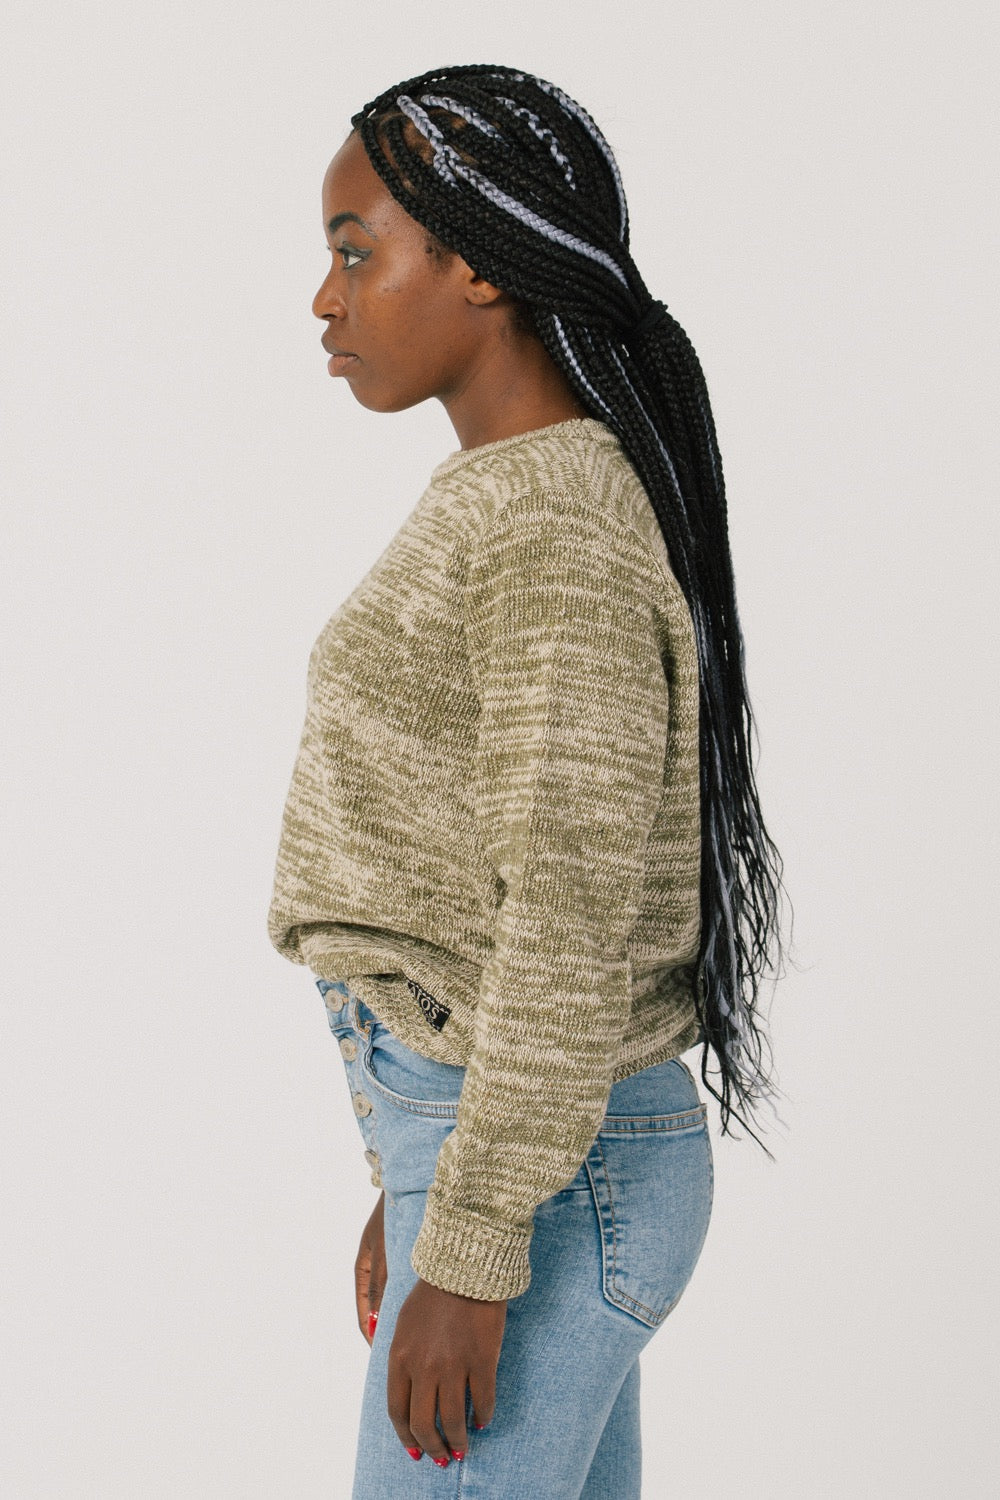 The model from the side. The shape of the sweater is basic and straight so it fits all bodies.